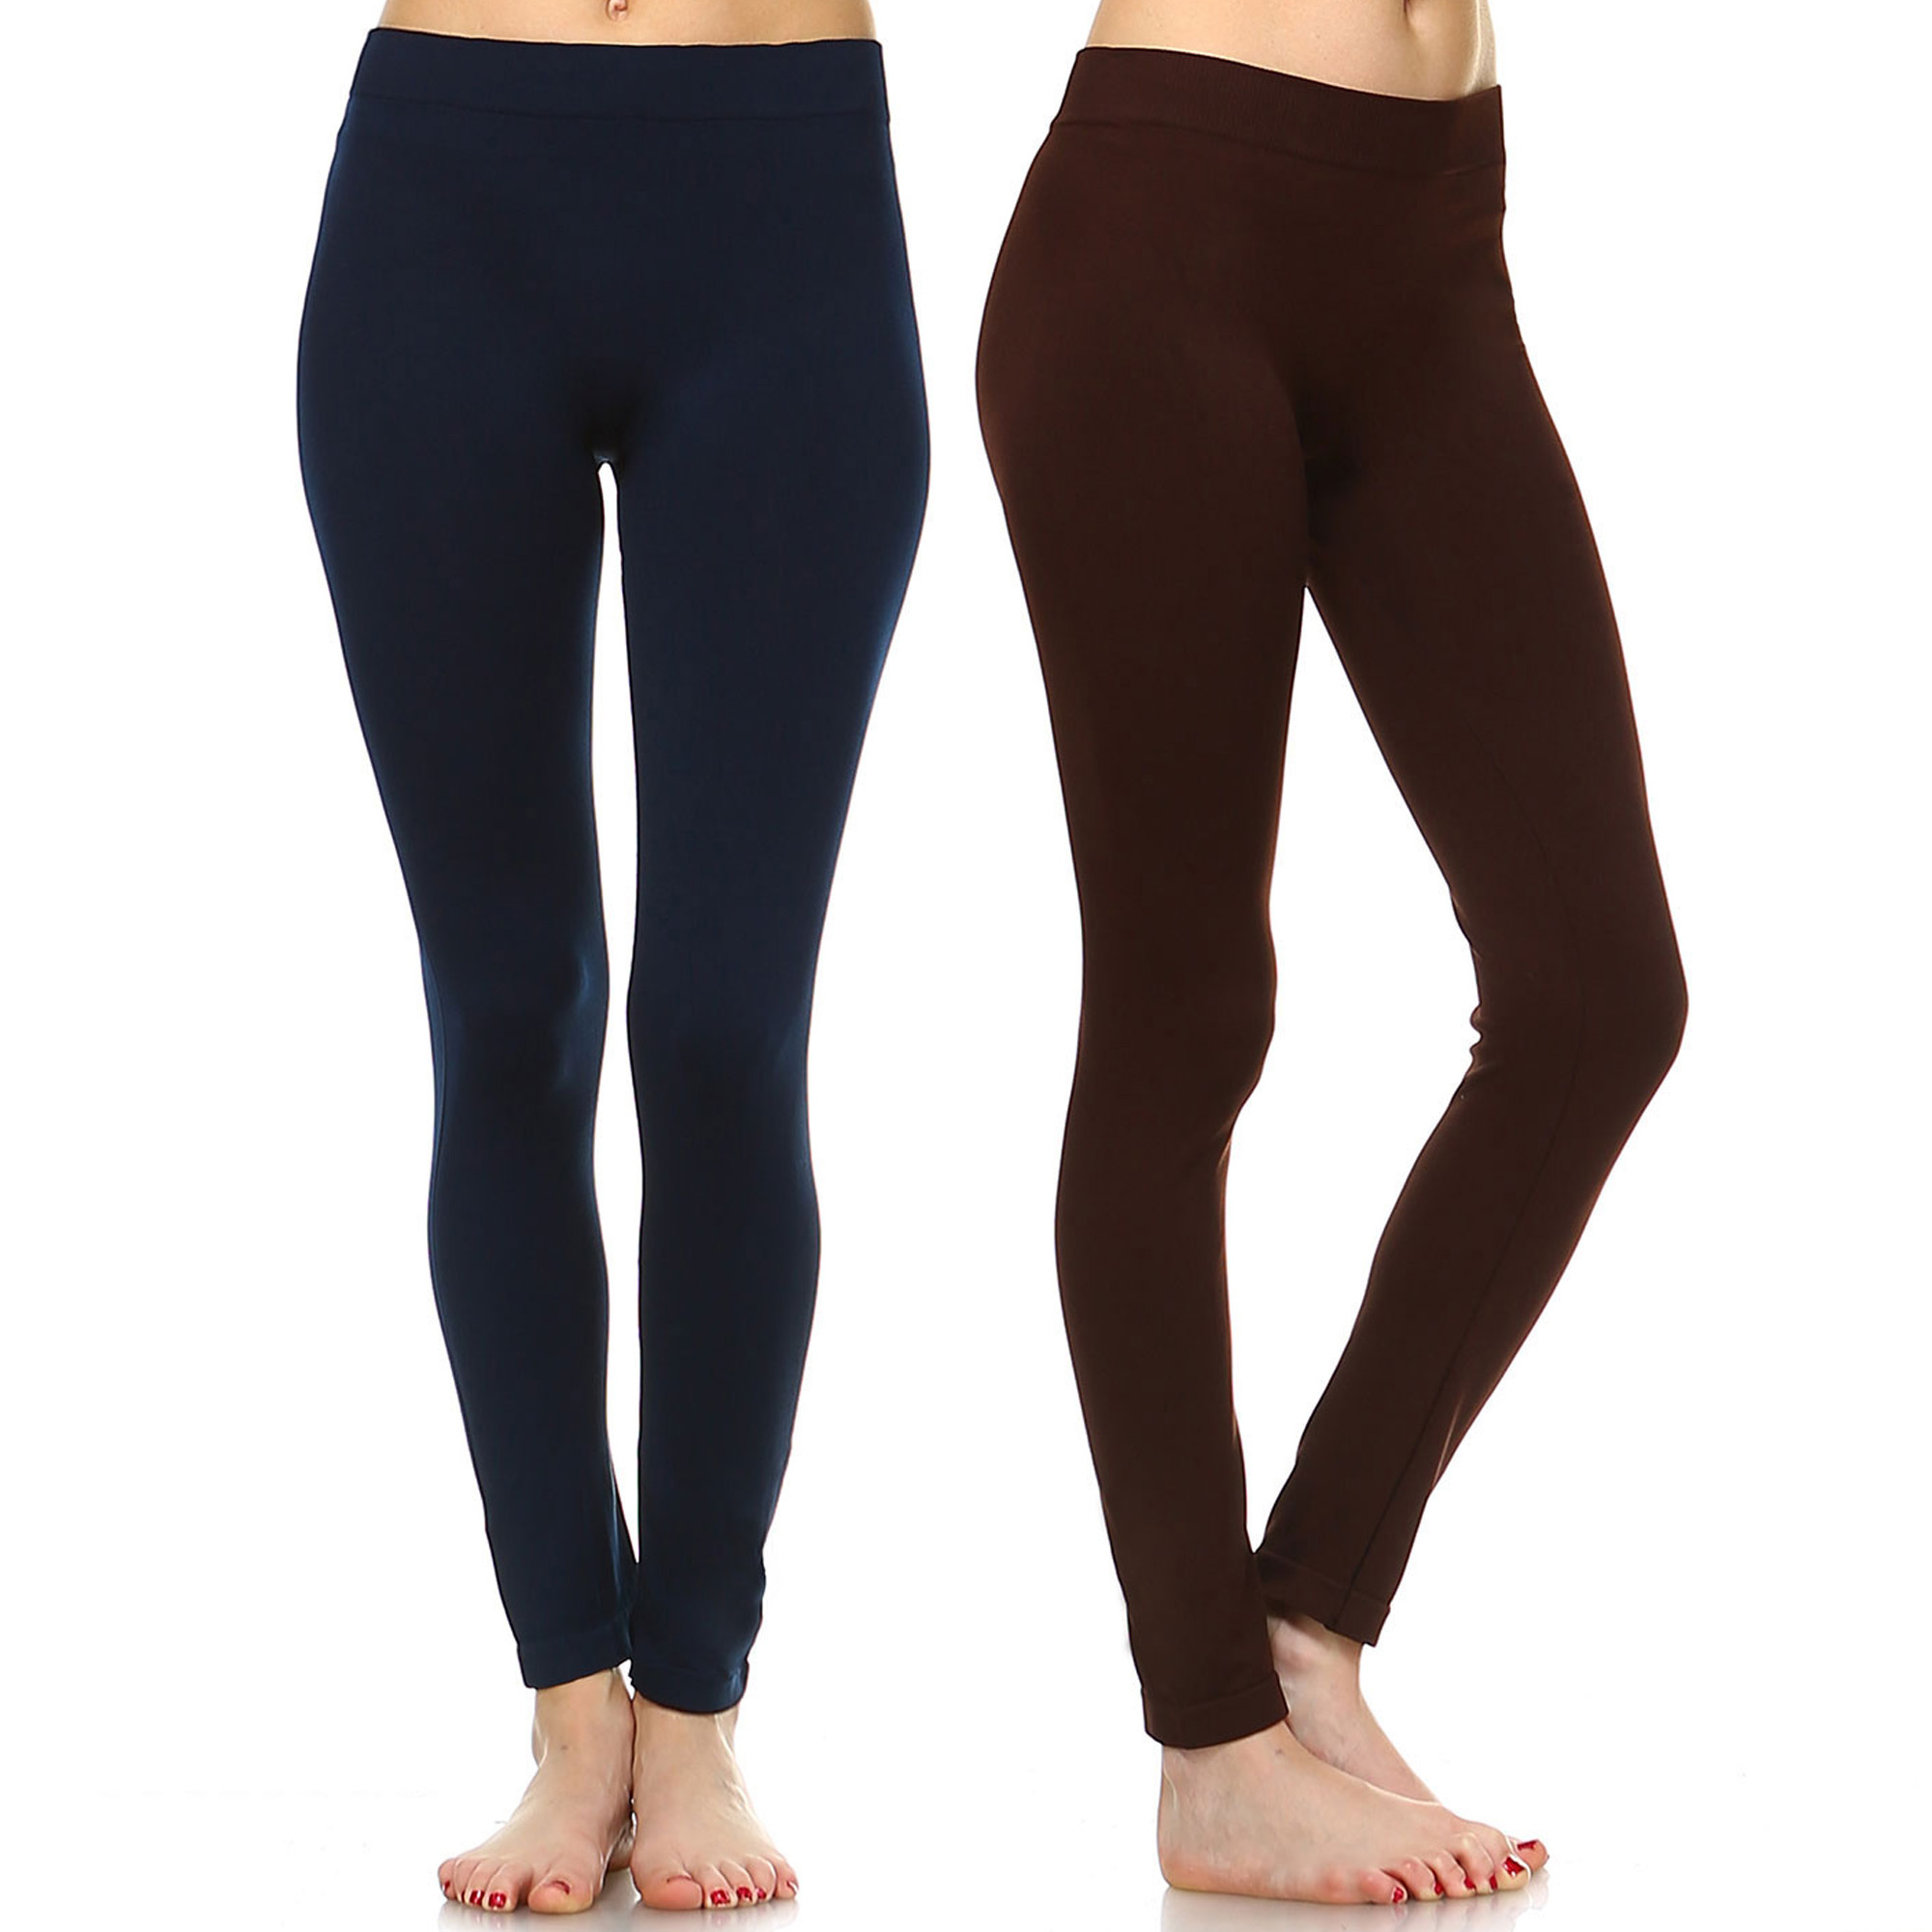 White Mark Women's Pack Of 2 Solid Color Leggings - Navy, Brown, One Size - Missy